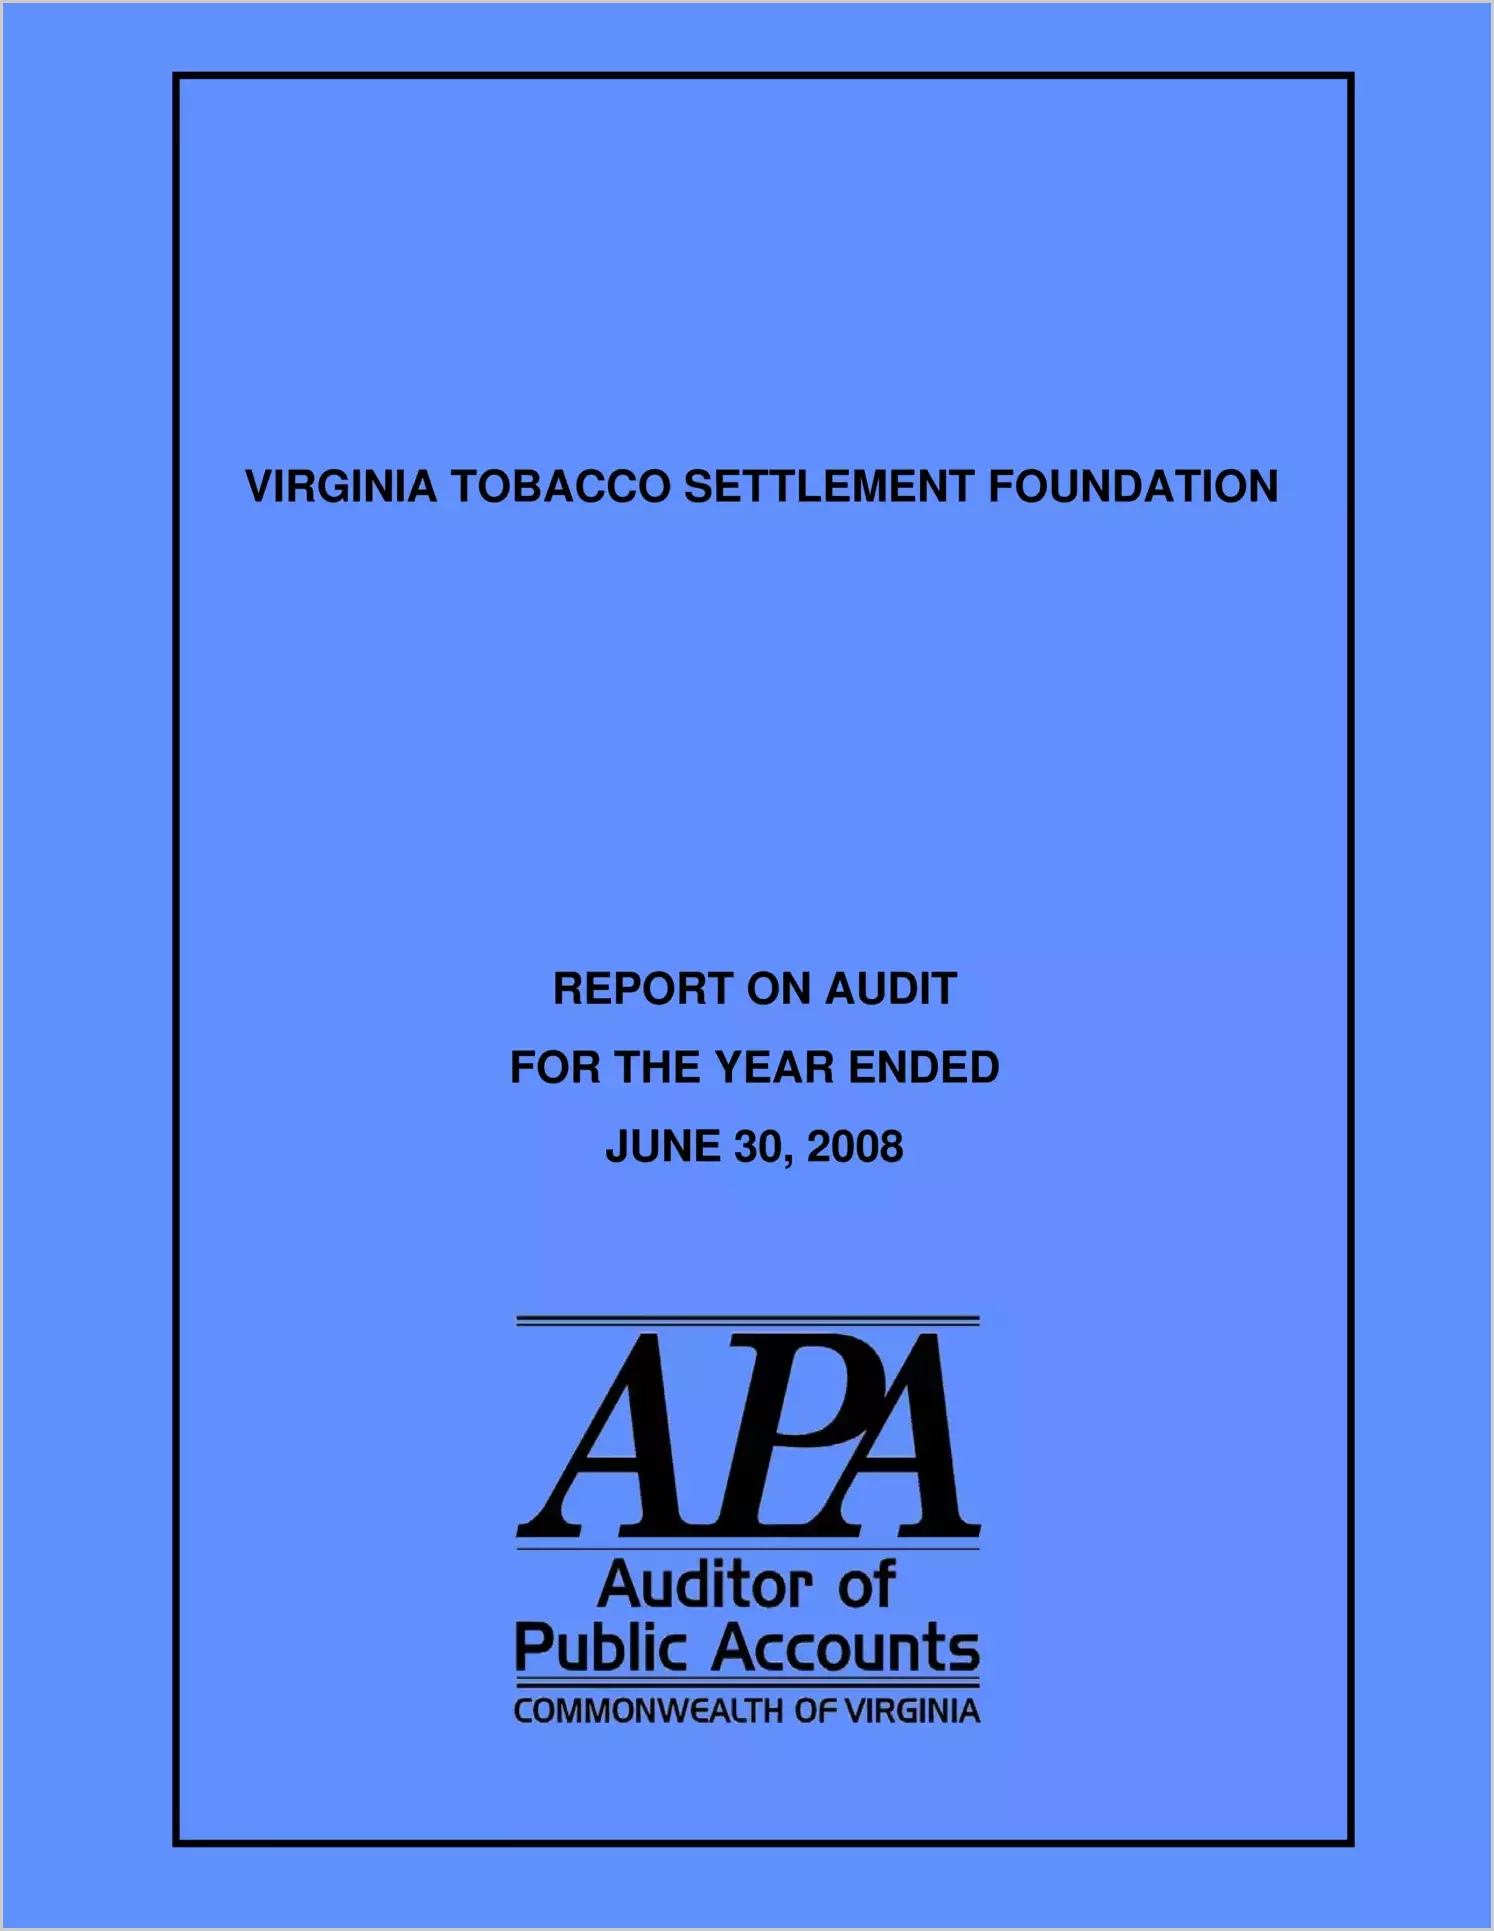 Virginia Tobacco Settlement Foundation for the year ended June 30, 2008